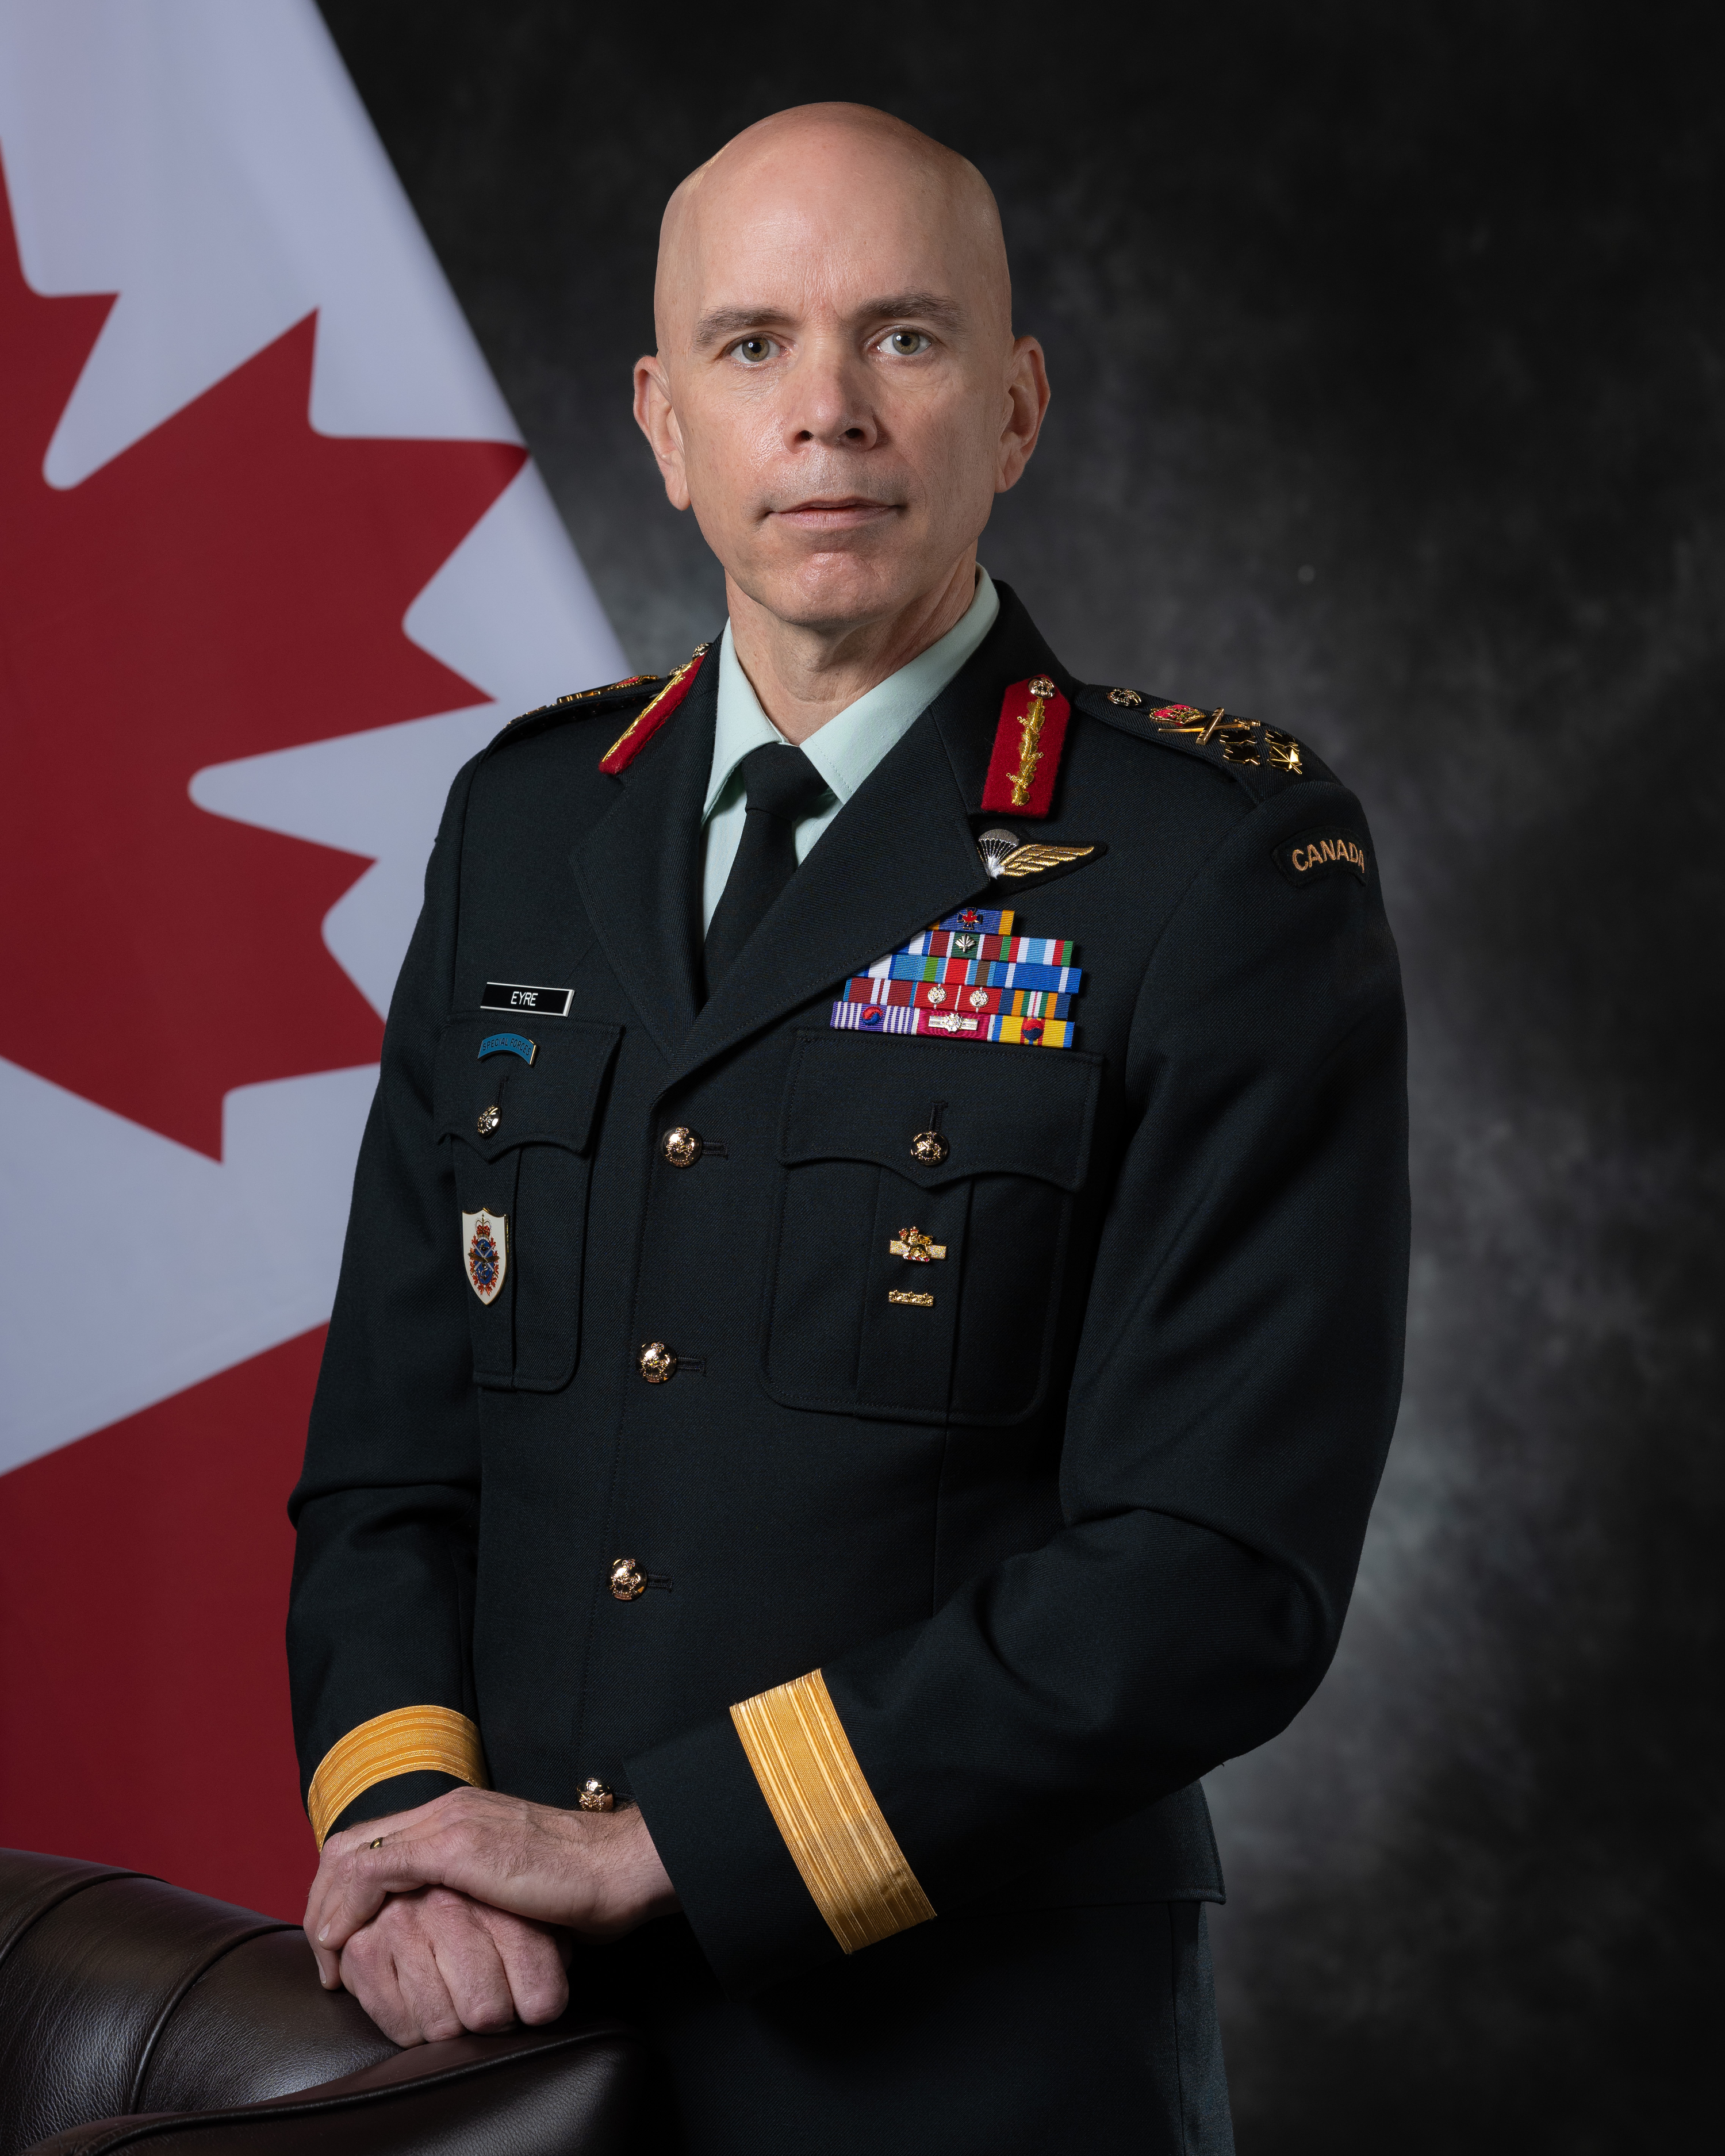 General Wayne Eyre, Chief of Defence Staff of Canada